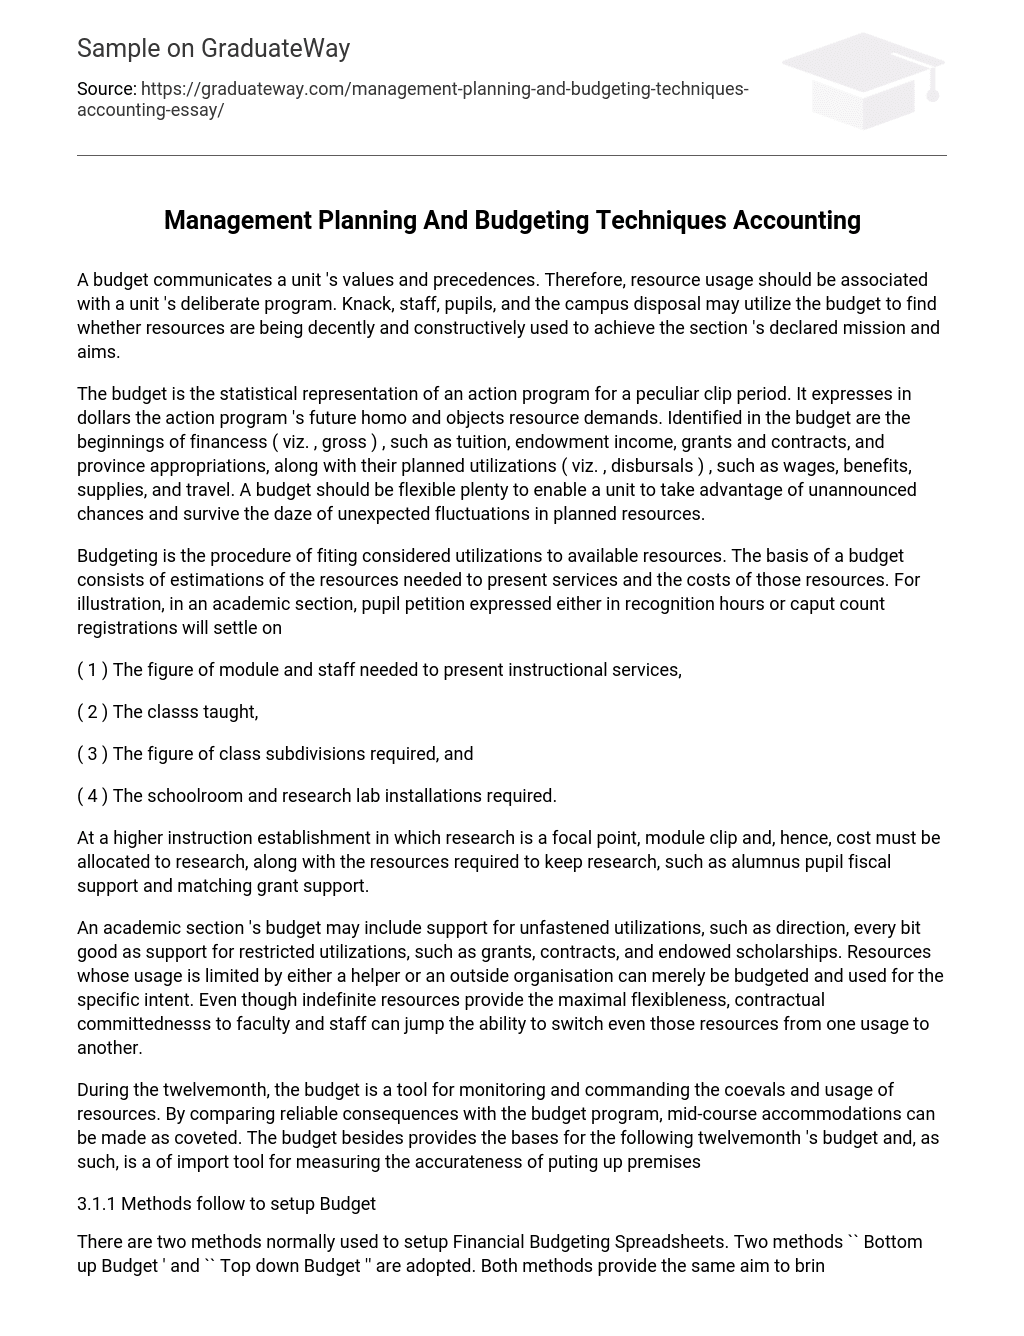 Management Planning And Budgeting Techniques Accounting